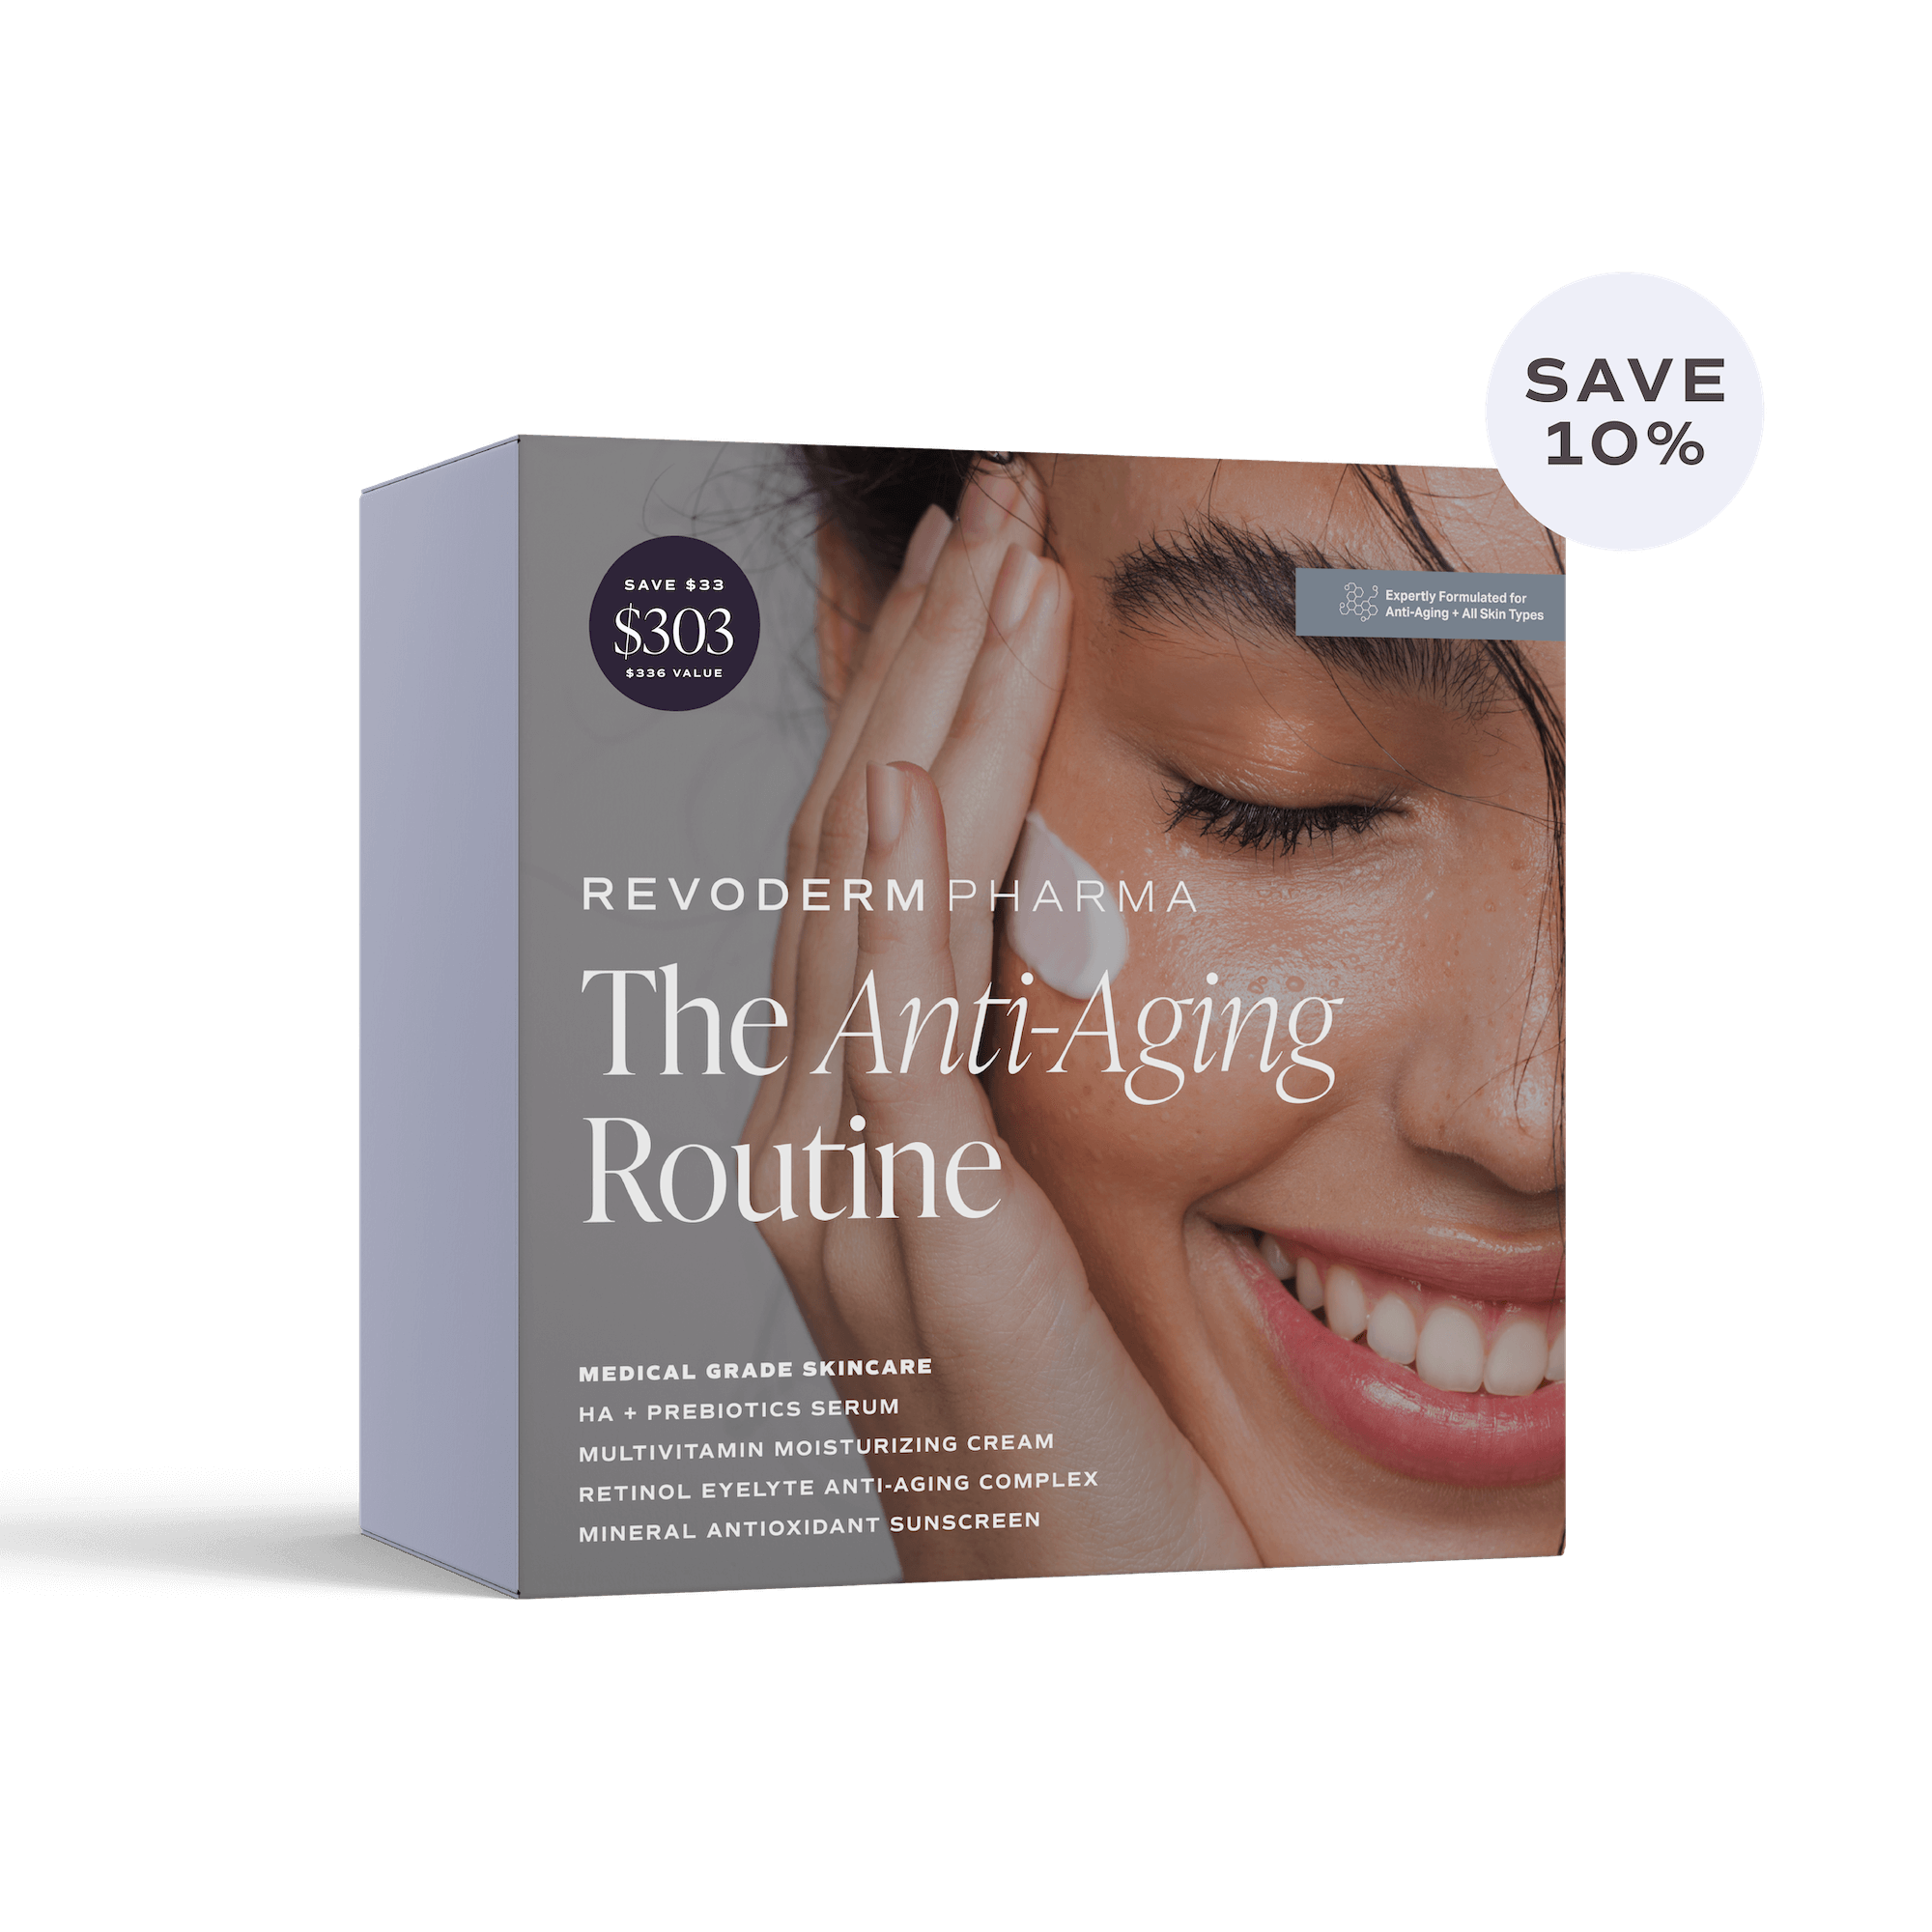 The Anti-Aging Routine